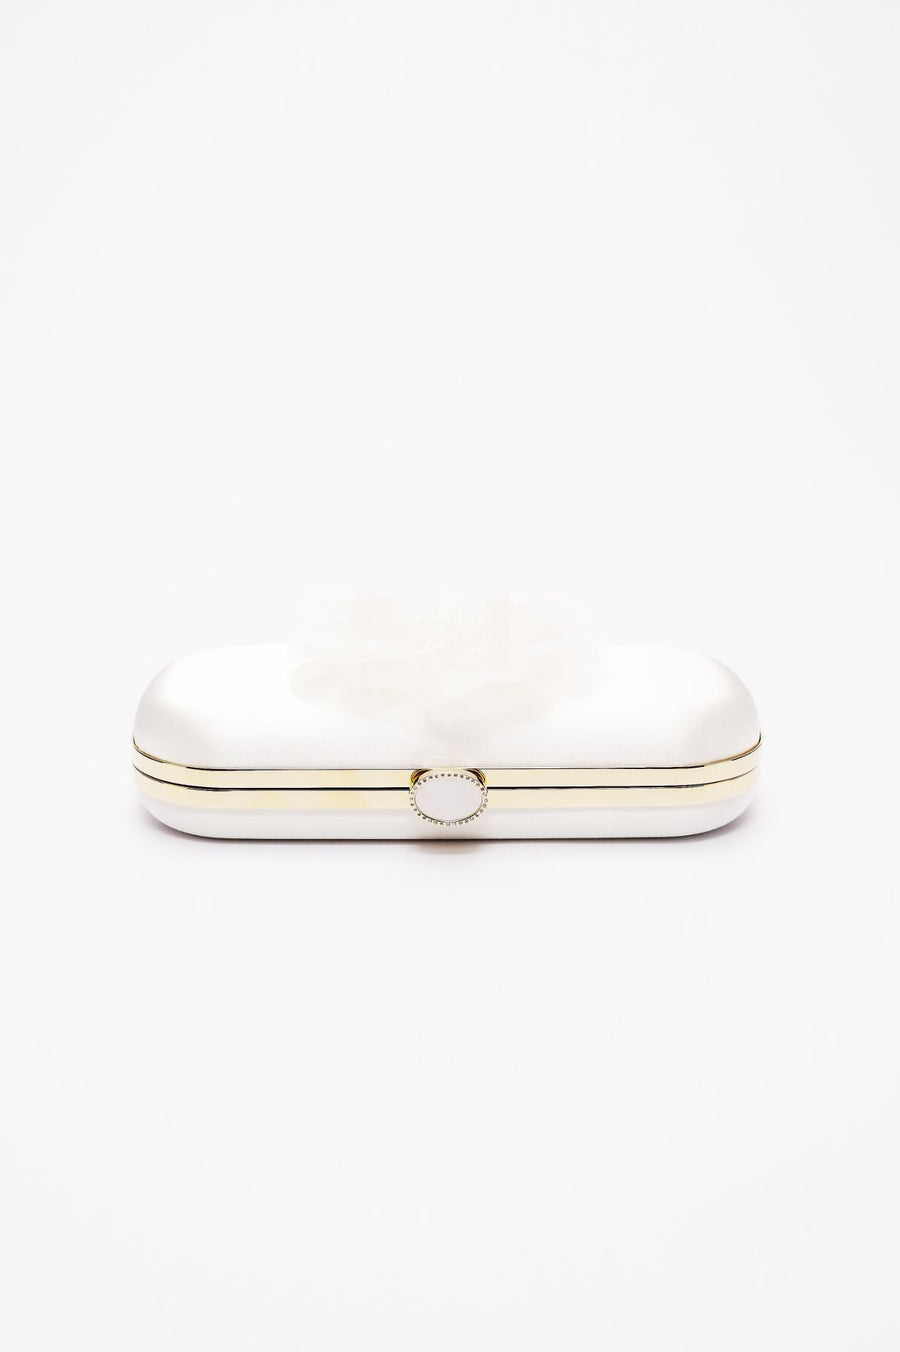 Top closed view of Ivory Bella Fiori Clutch with  Ivory organza flower with a micro pearl center and gold frame.